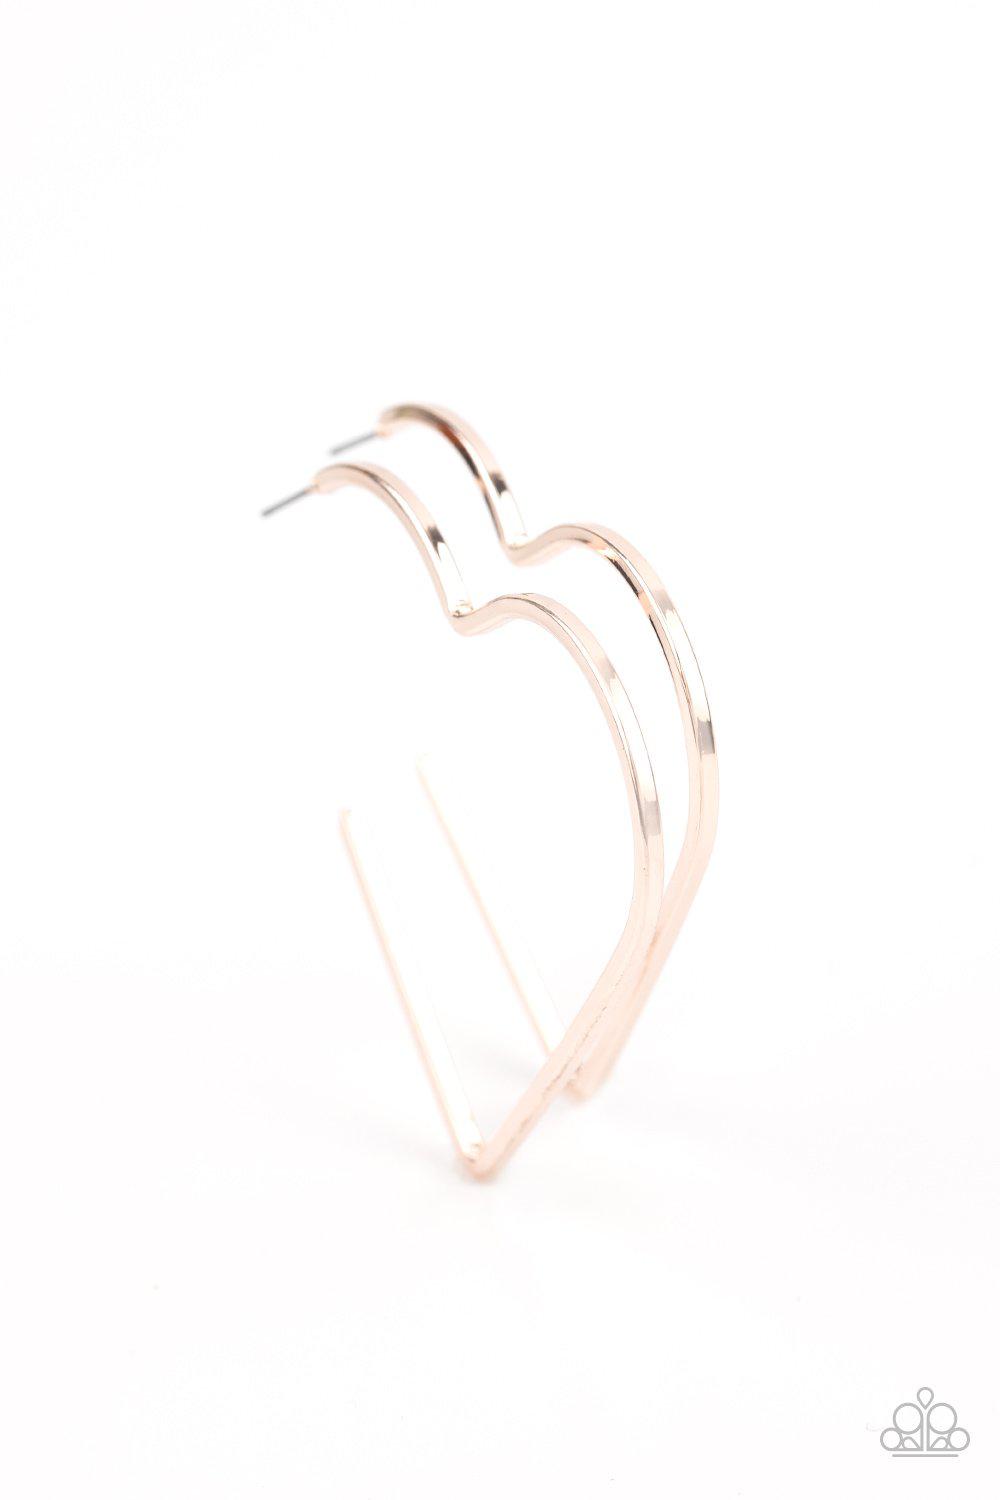 I HEART a Rumor Rose Gold Hoop Earrings - Paparazzi Accessories - lightbox -CarasShop.com - $5 Jewelry by Cara Jewels